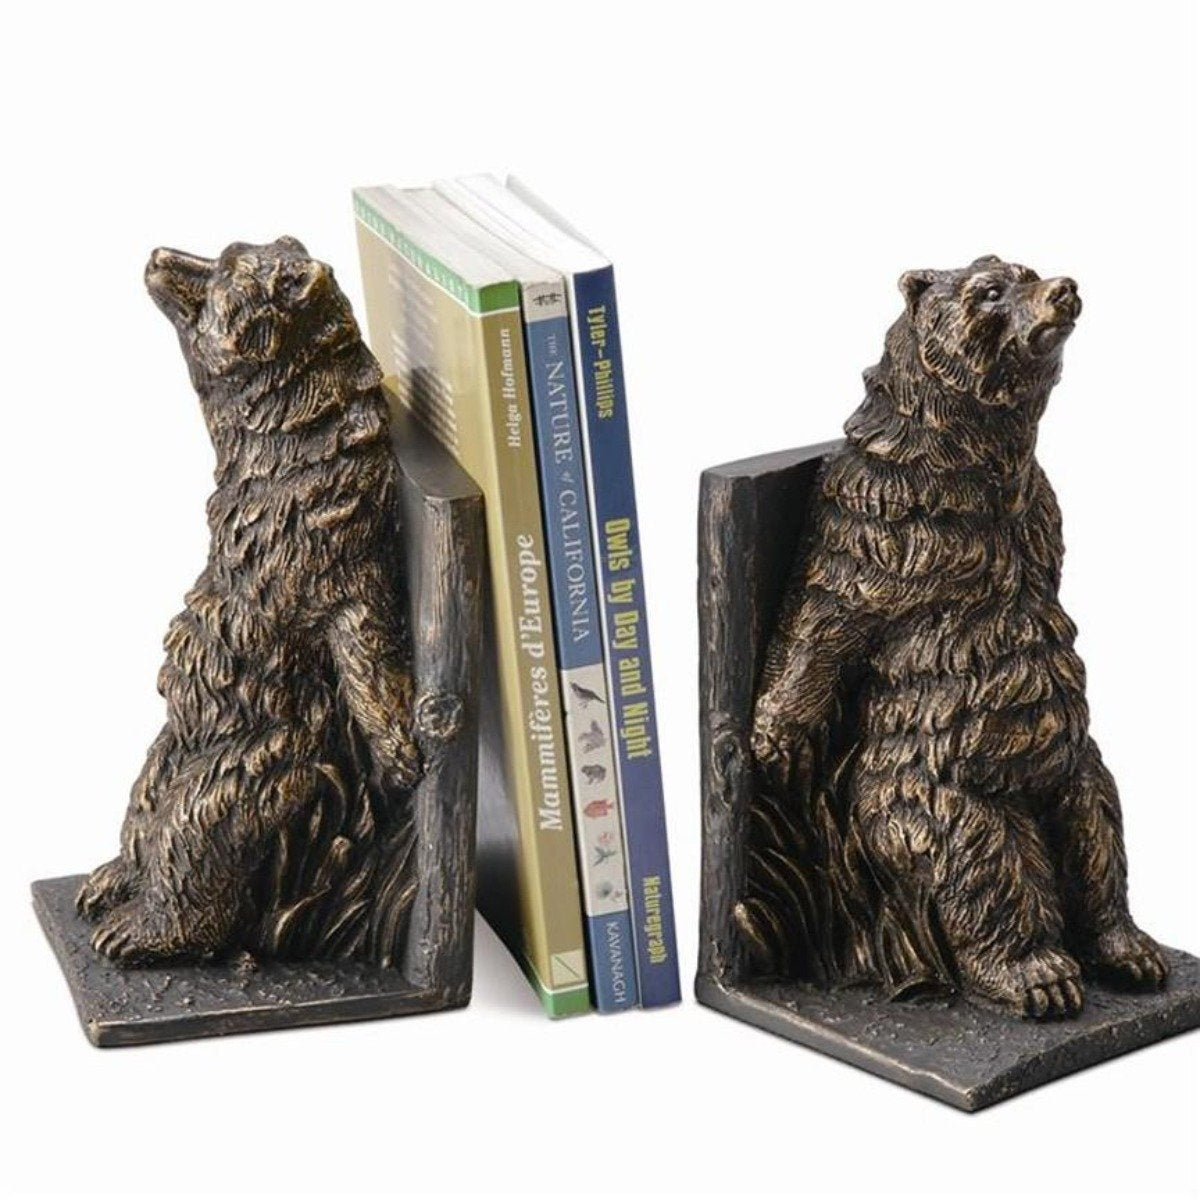 Reclining Bear Bookends-Decor | Iron Accents